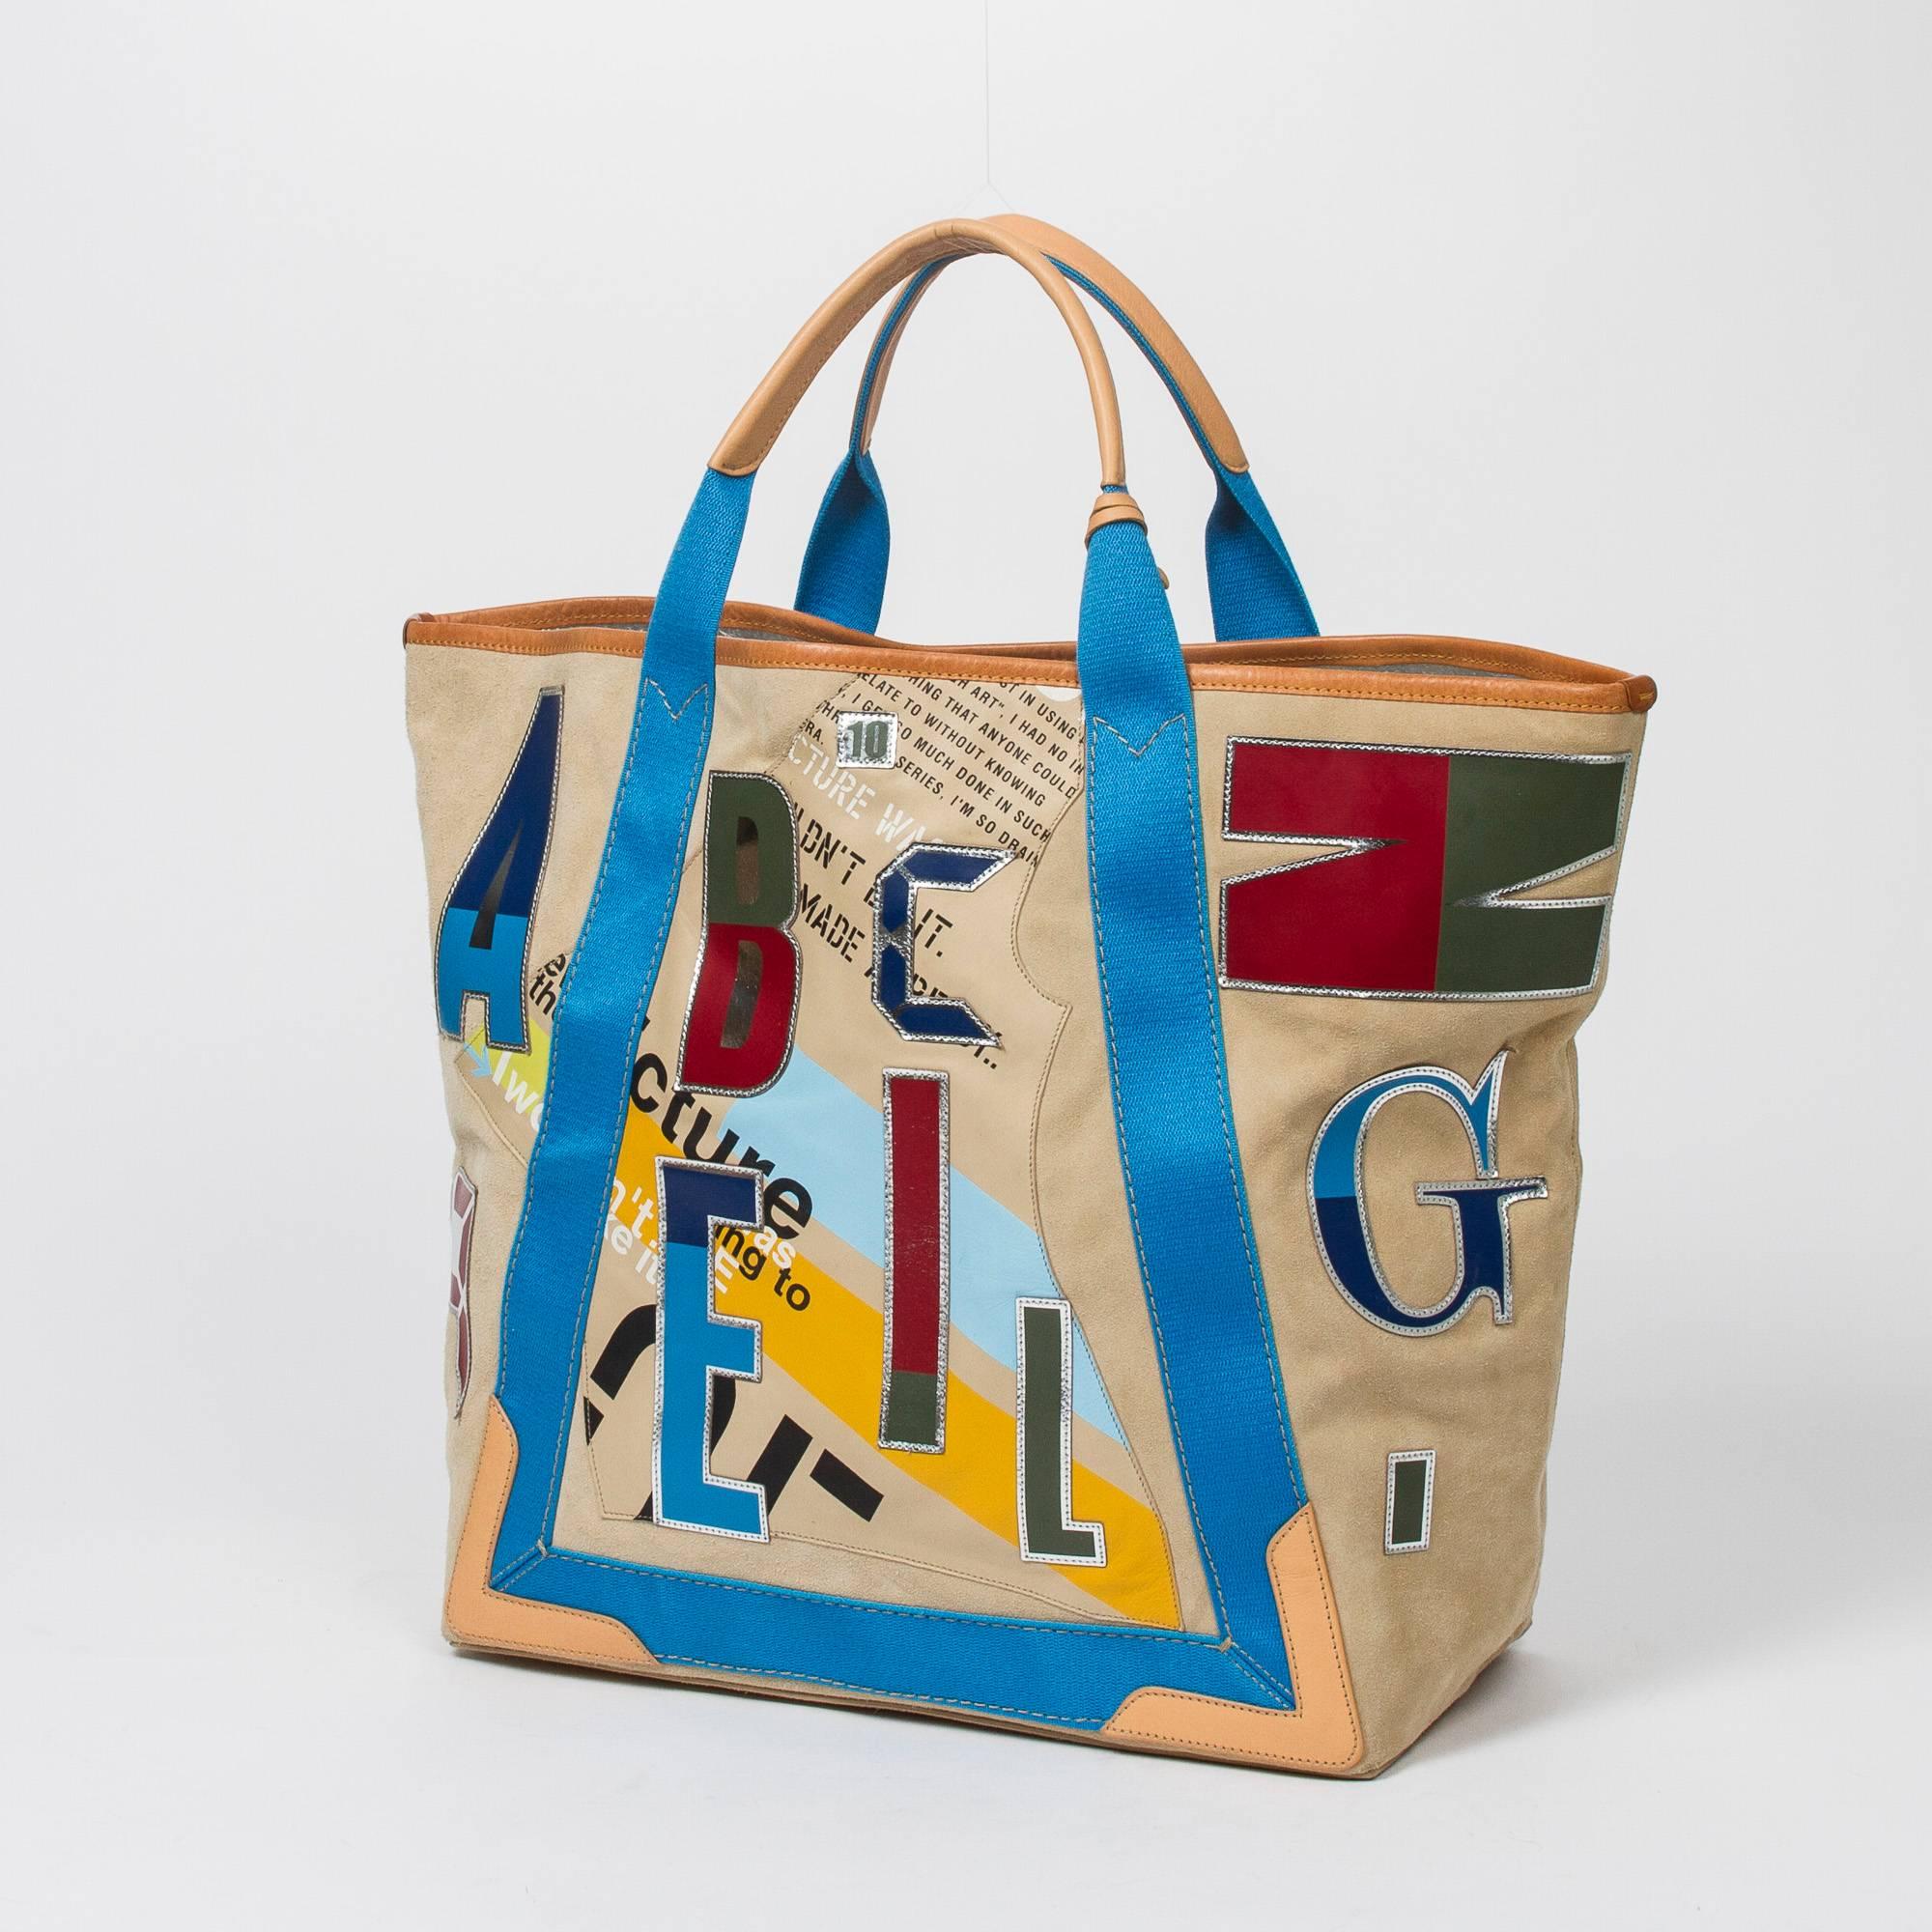 Daim Alphabet Tote in beige suede with beige leather and blue canvas straps, natural hide leather details, silver tone hardware. Metallic silver distressed leather lined interior with one zip pocket. Mirror and dustbag included. Some slight signs of